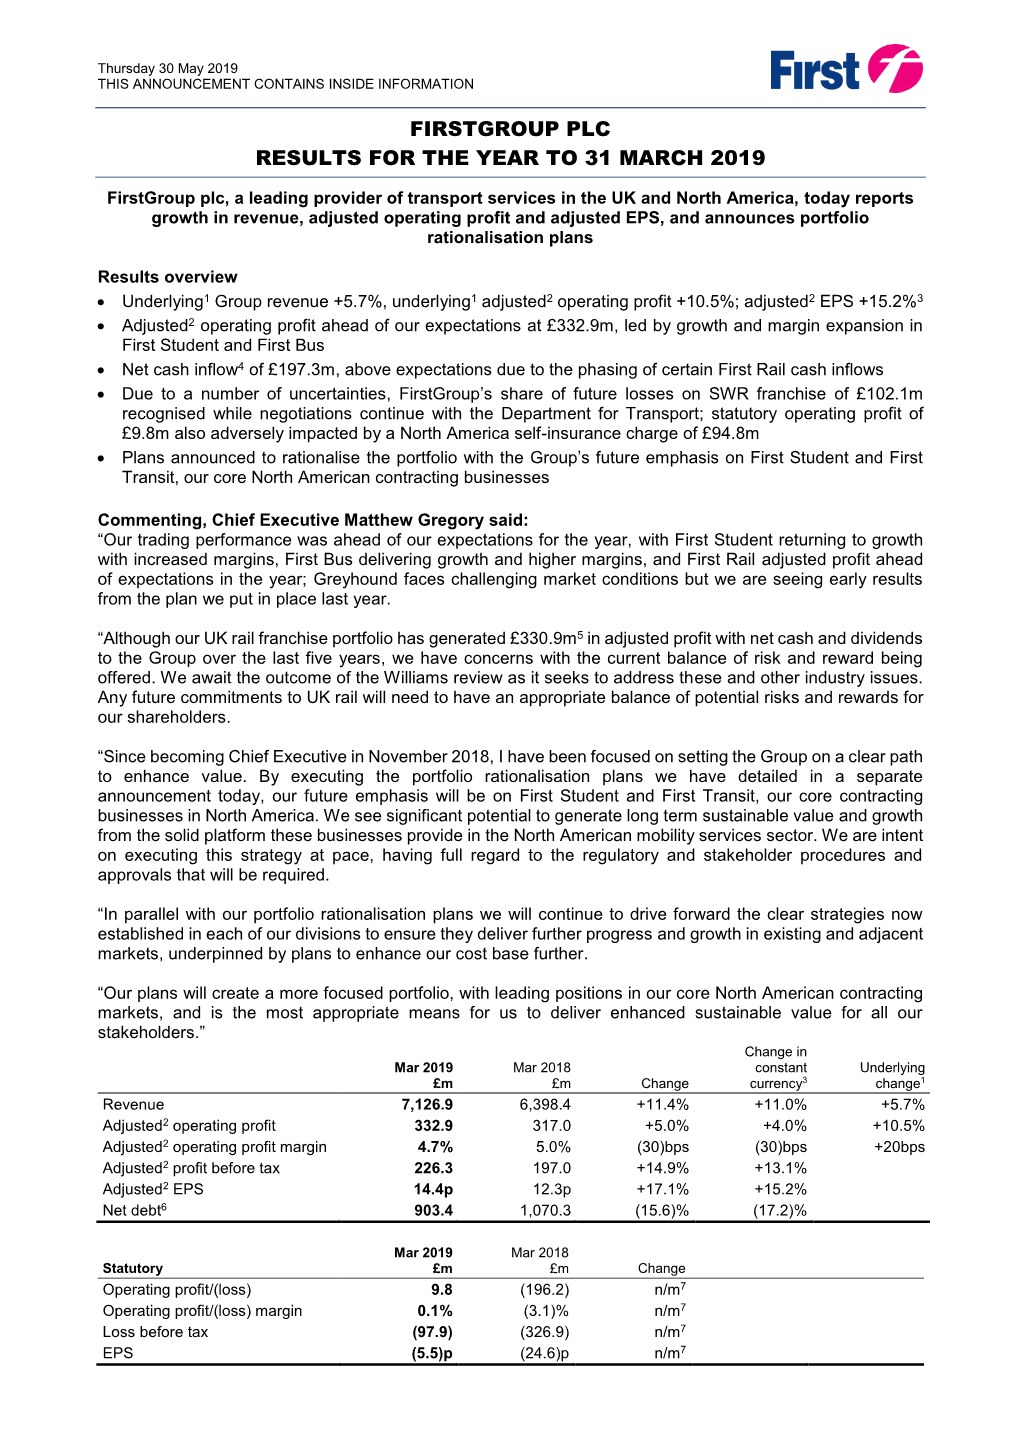 Firstgroup Plc Results for the Year to 31 March 2019